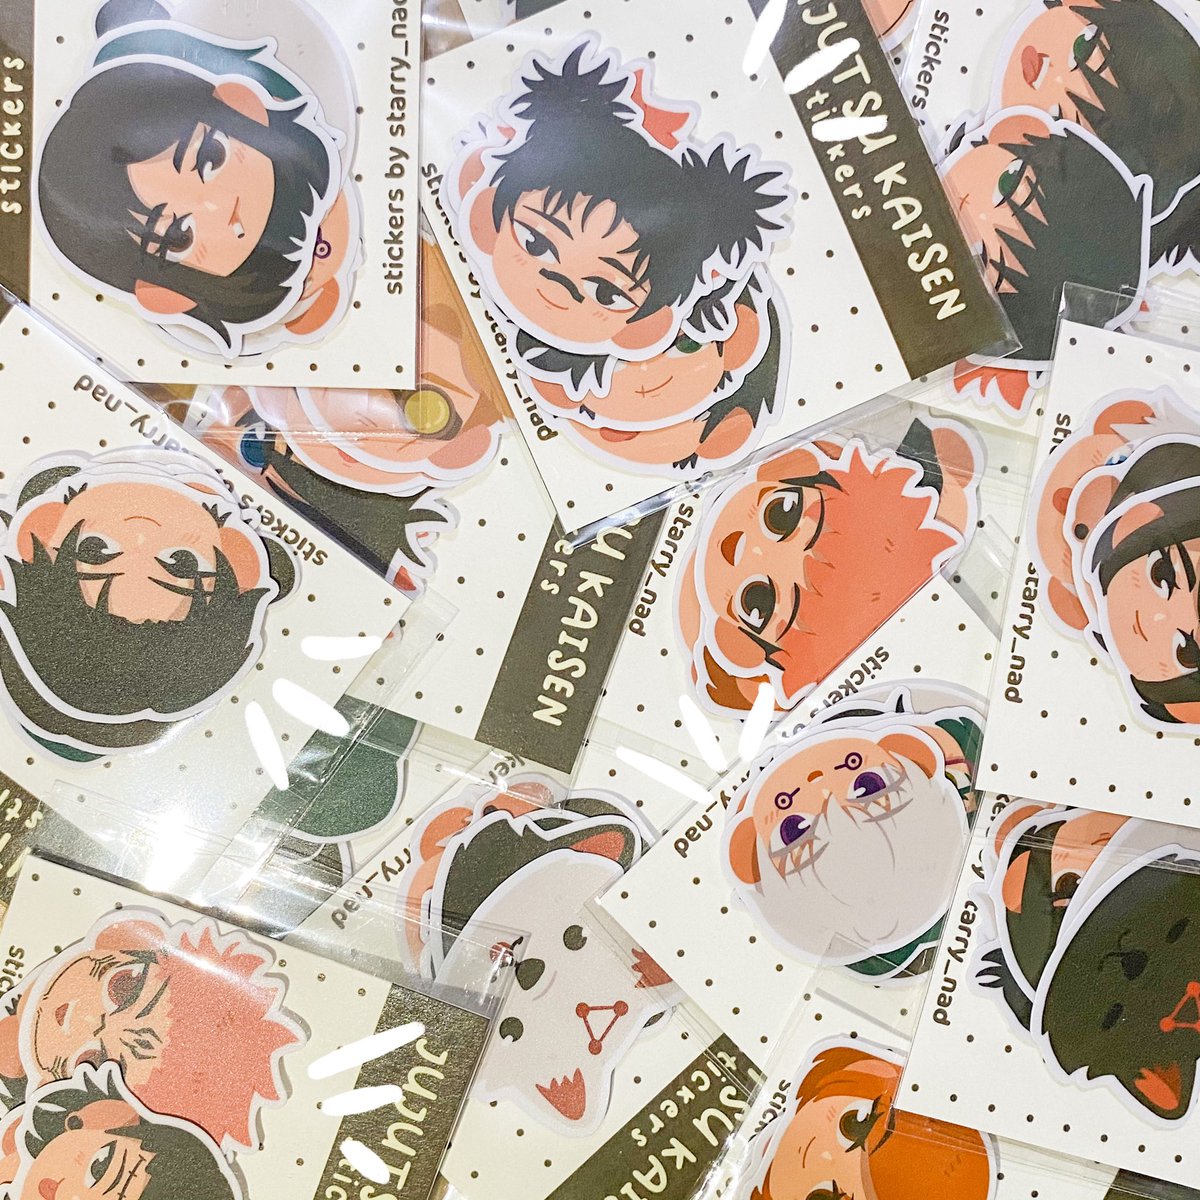 ☆Shop Update☆
Sticker sheets and sets are here!! 

[other sample pictures on the thread below] 